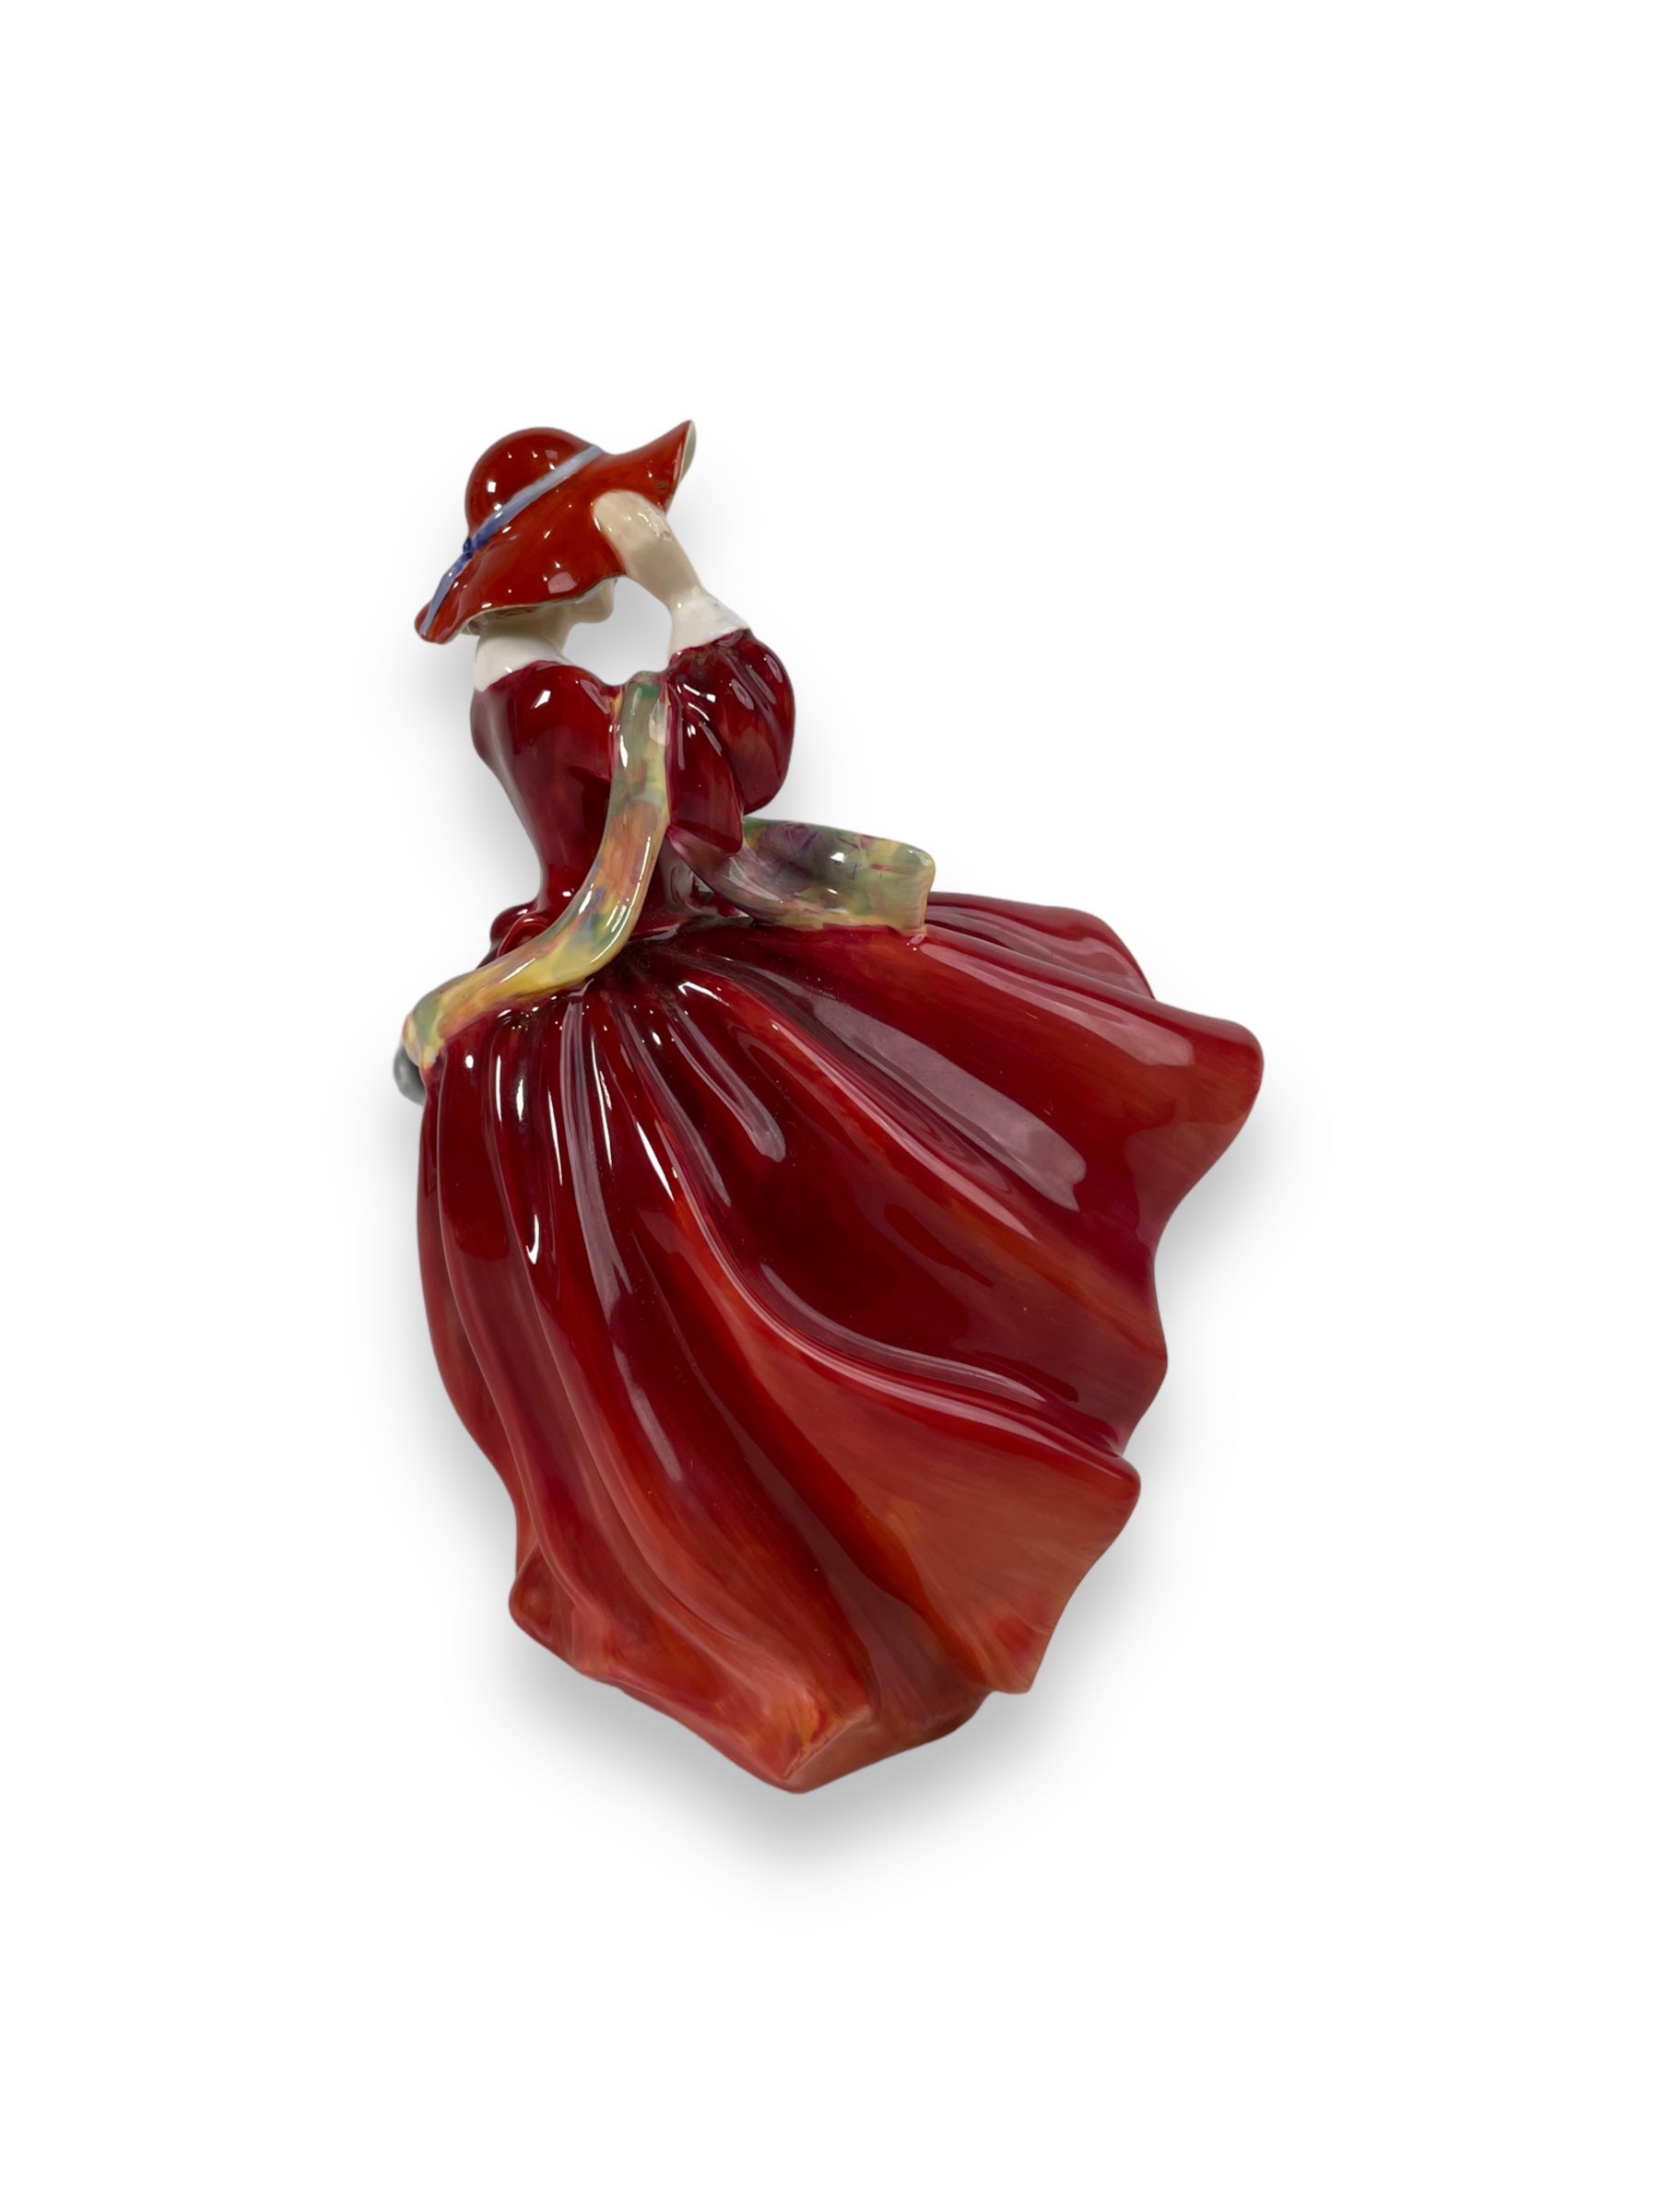  Figurine vintage Royal Doulton "Top O' the Hill"